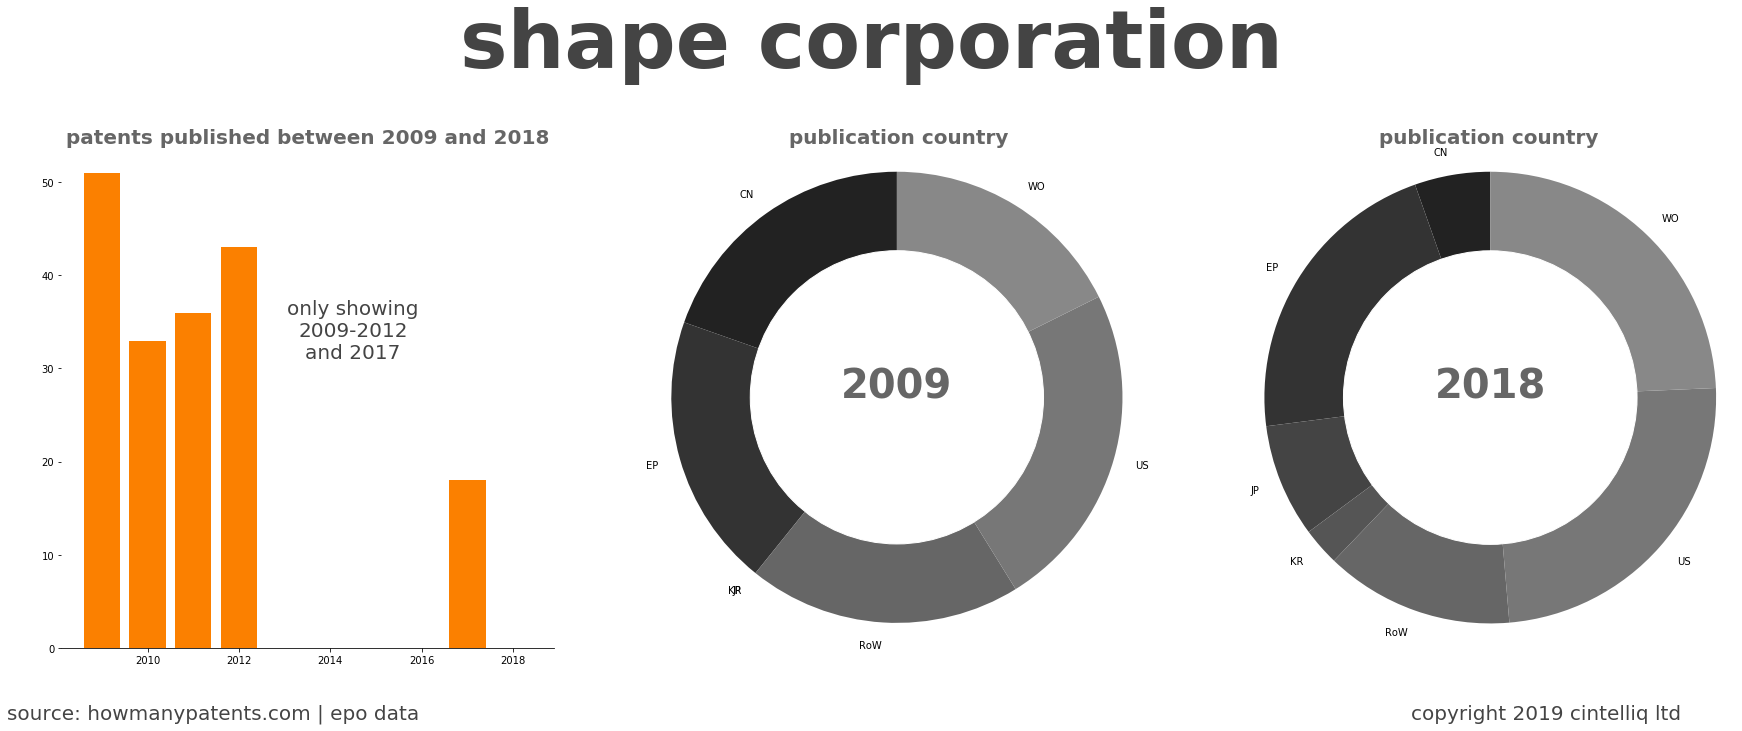 summary of patents for Shape Corporation